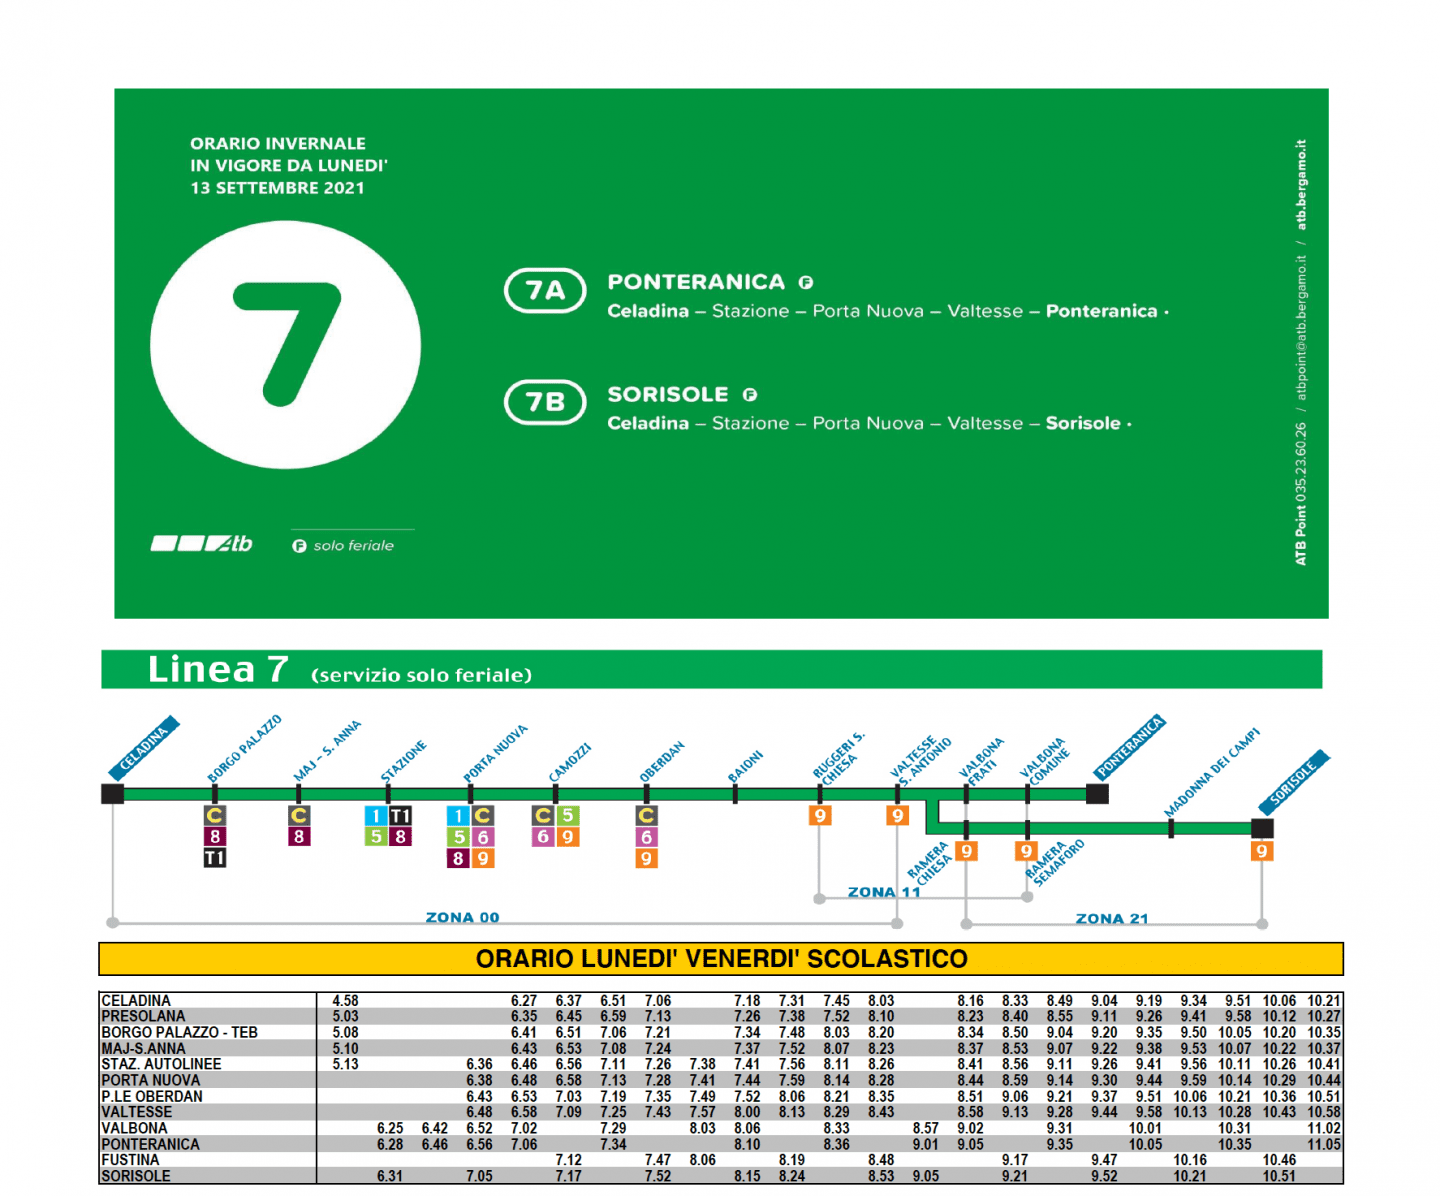 Schedule for a bus line in Italy